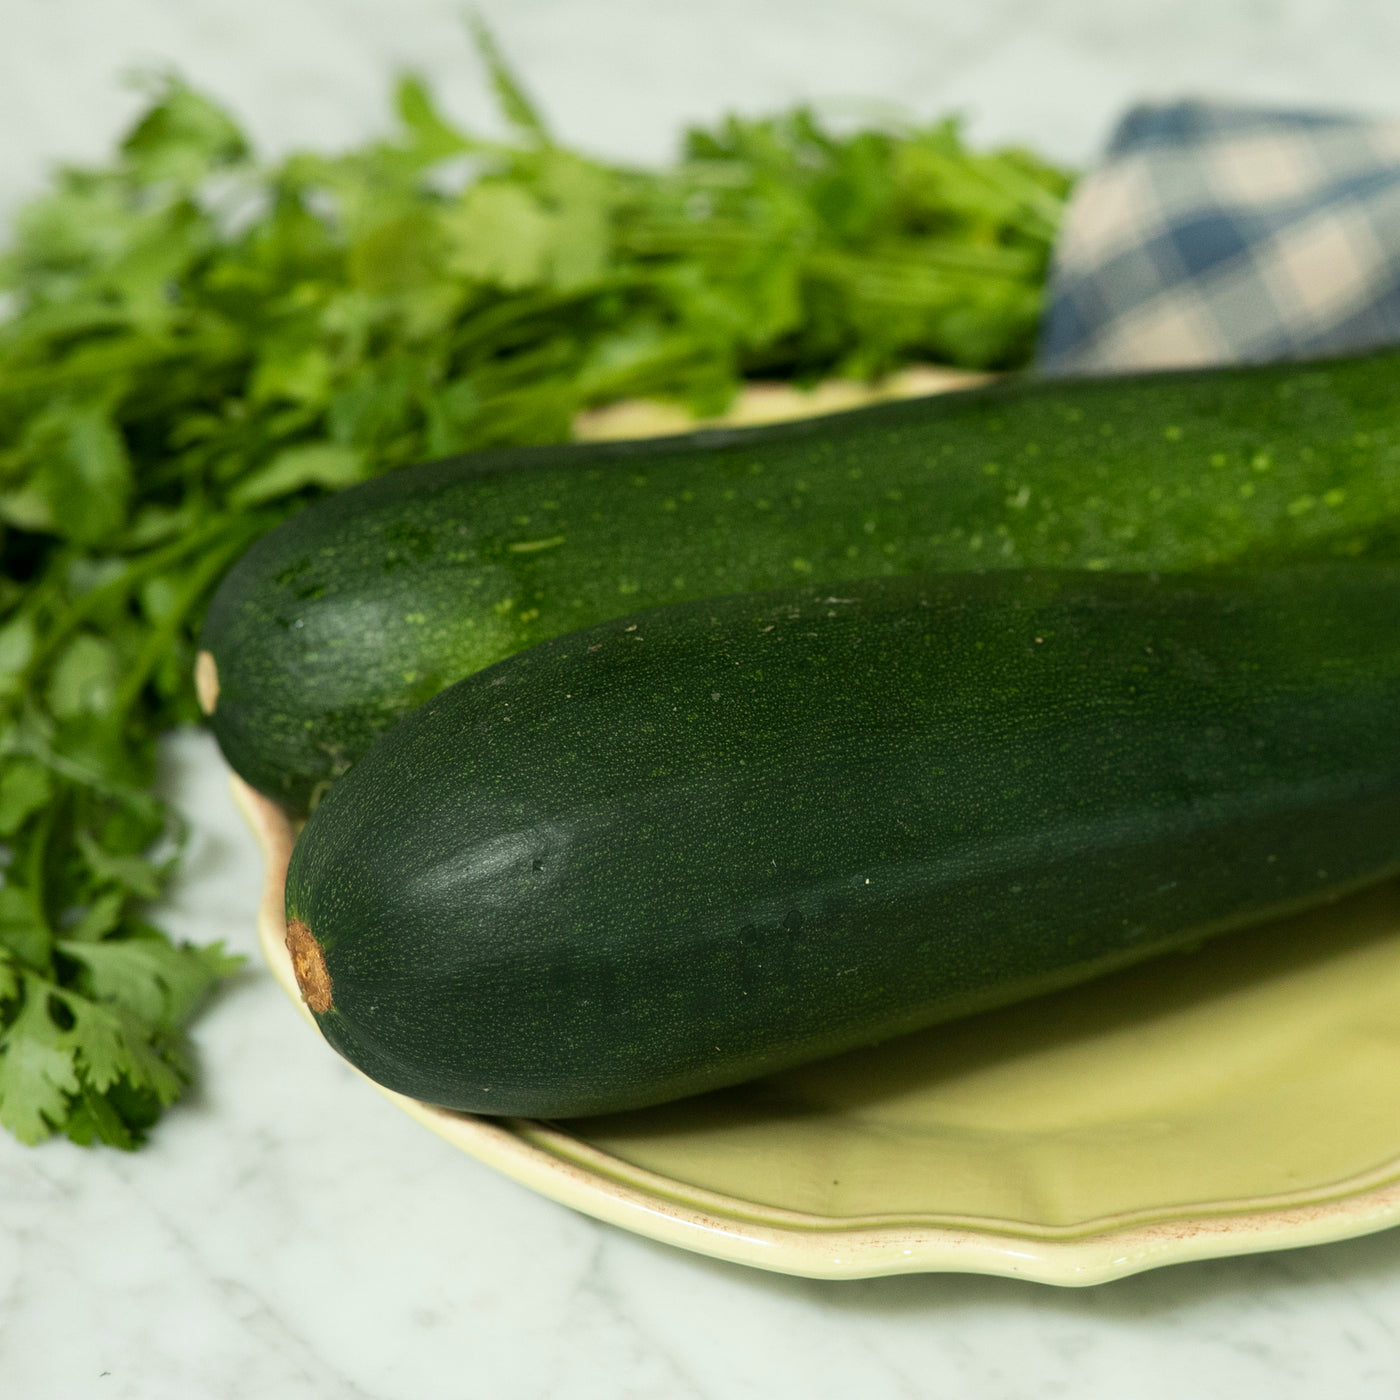 green-zucchini-online-delivery-supermarket-grocery-singapore-thenewgrocer